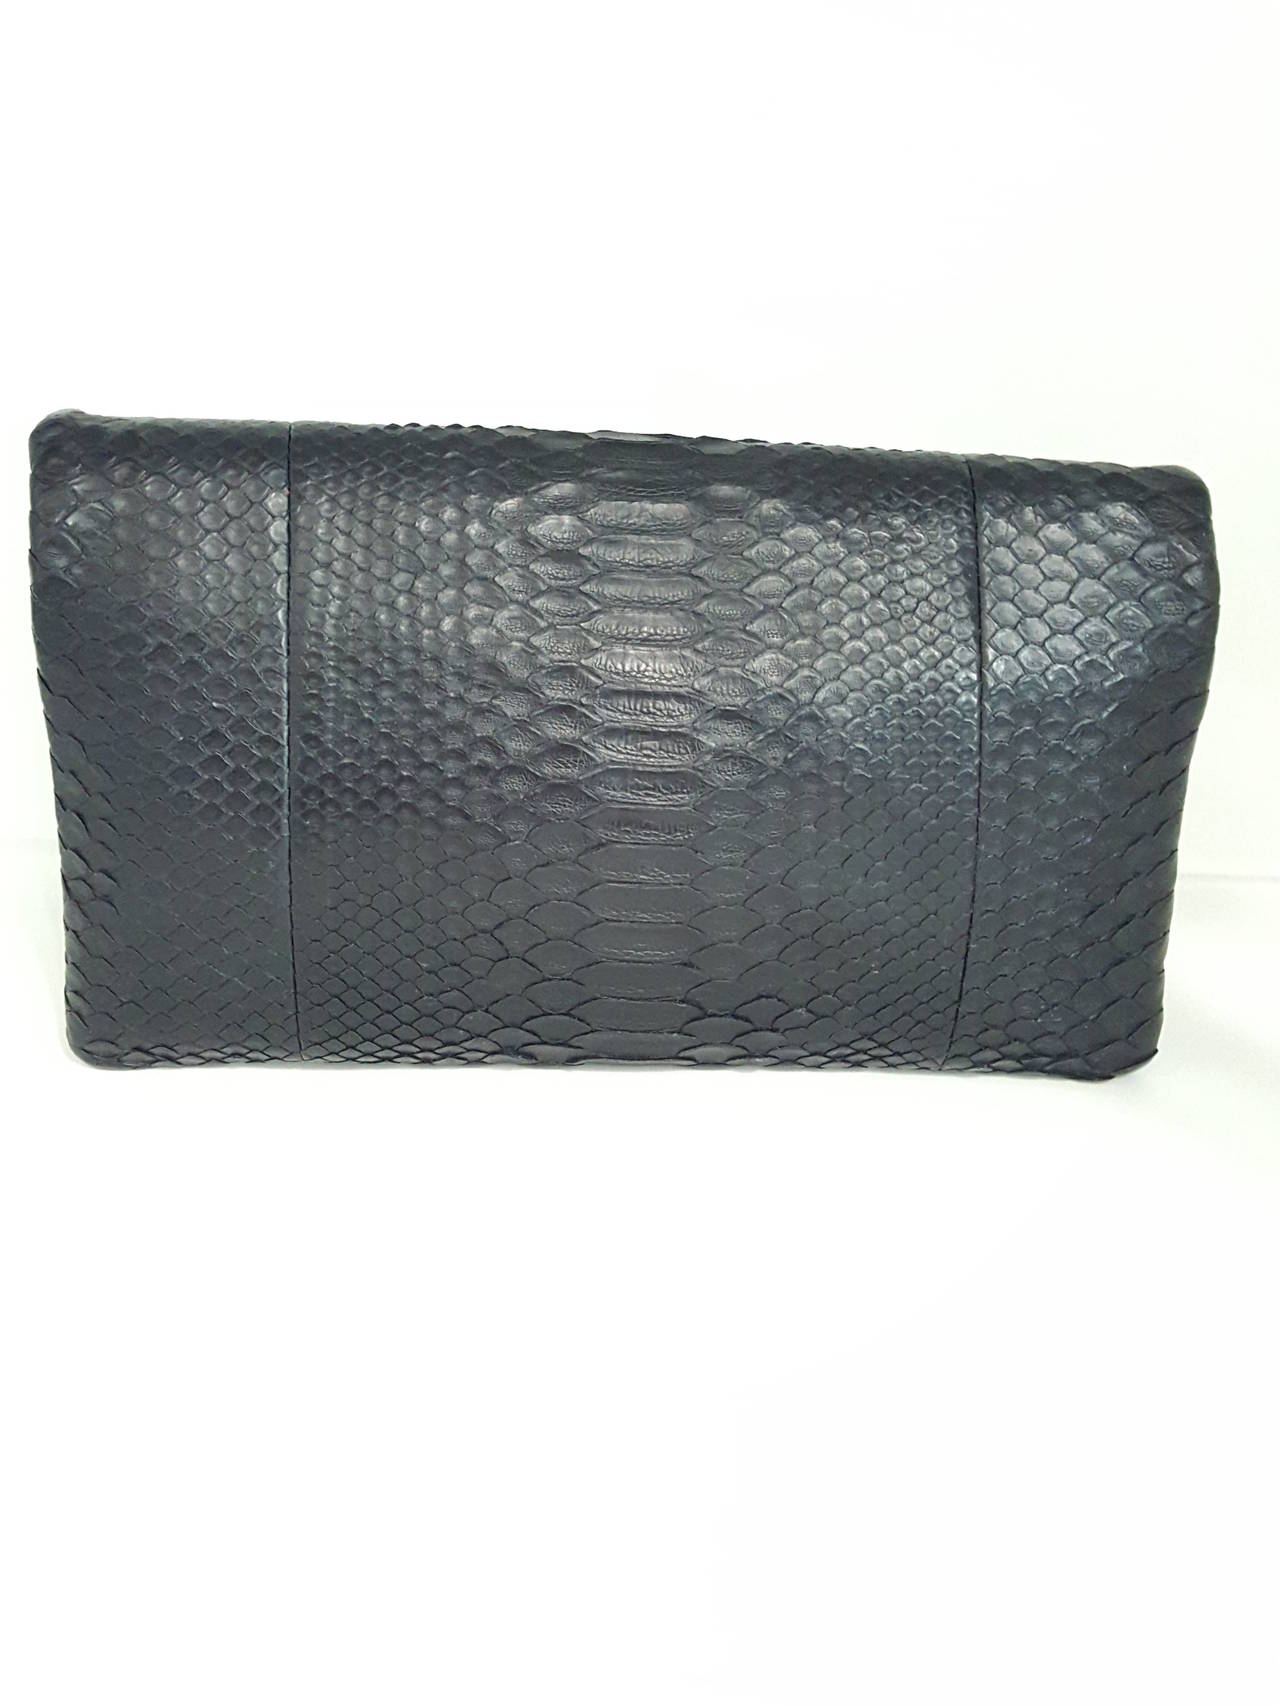 Offered for sale is a soft and supple CHANEL Black Python fold over clutch. This is Brand new and never worn.  The outside is soft Python skin and the inside is black lamb.  There are two zipper compartments.  One is 5